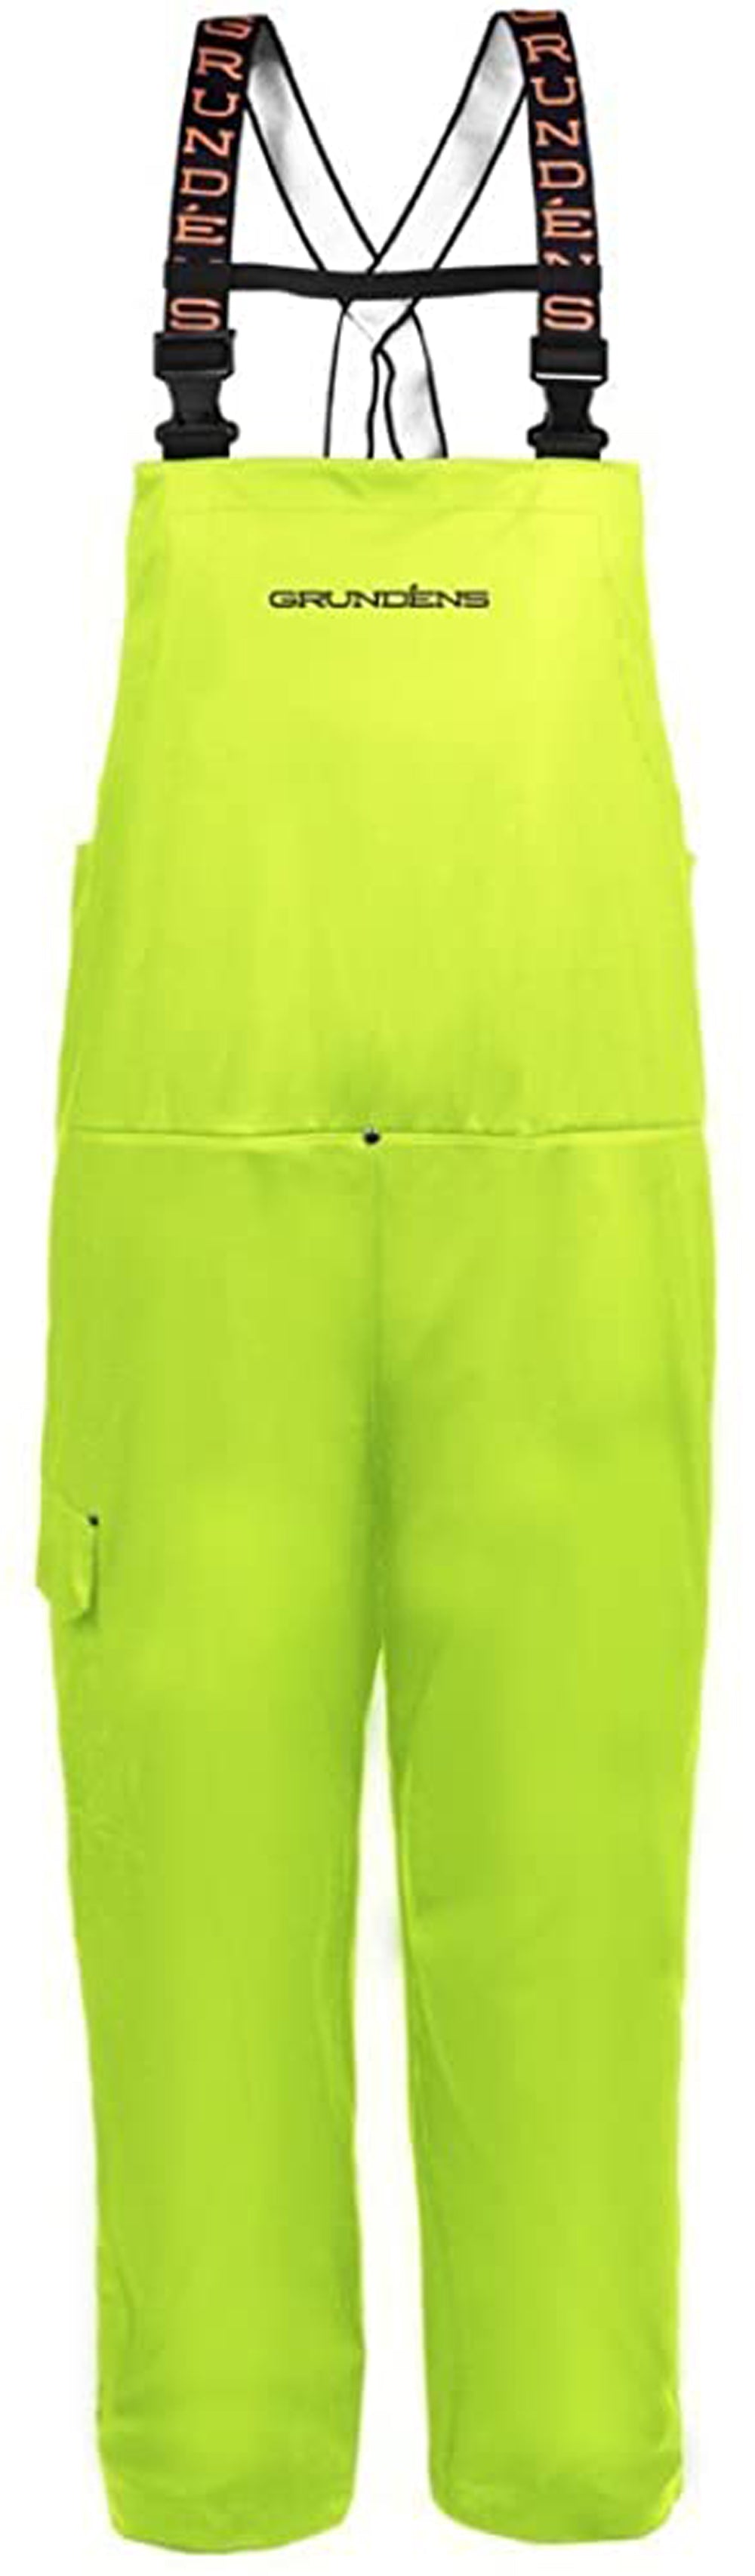 Neptune Bib in Hi Vis Yellow color from the front view